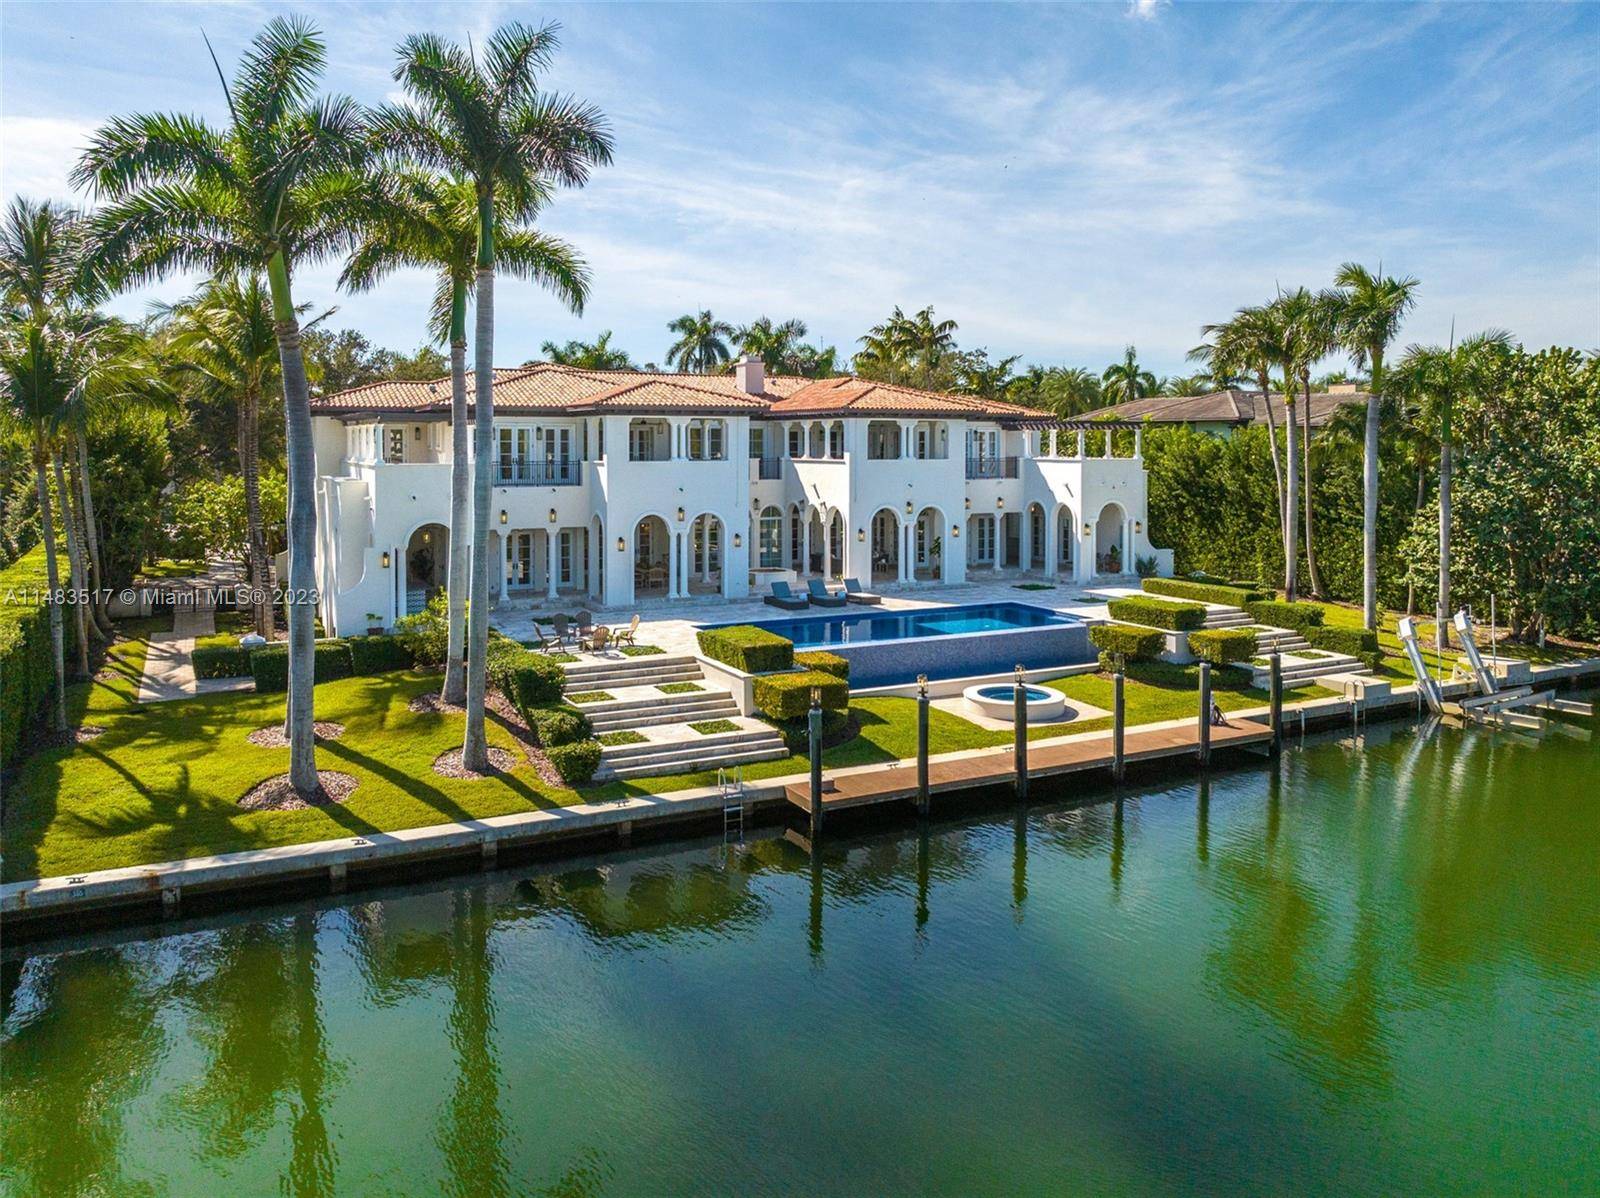 This breathtaking California Modern Spanish WATERFRONT home is in the highly desirable GATED community of GABLES ESTATES.